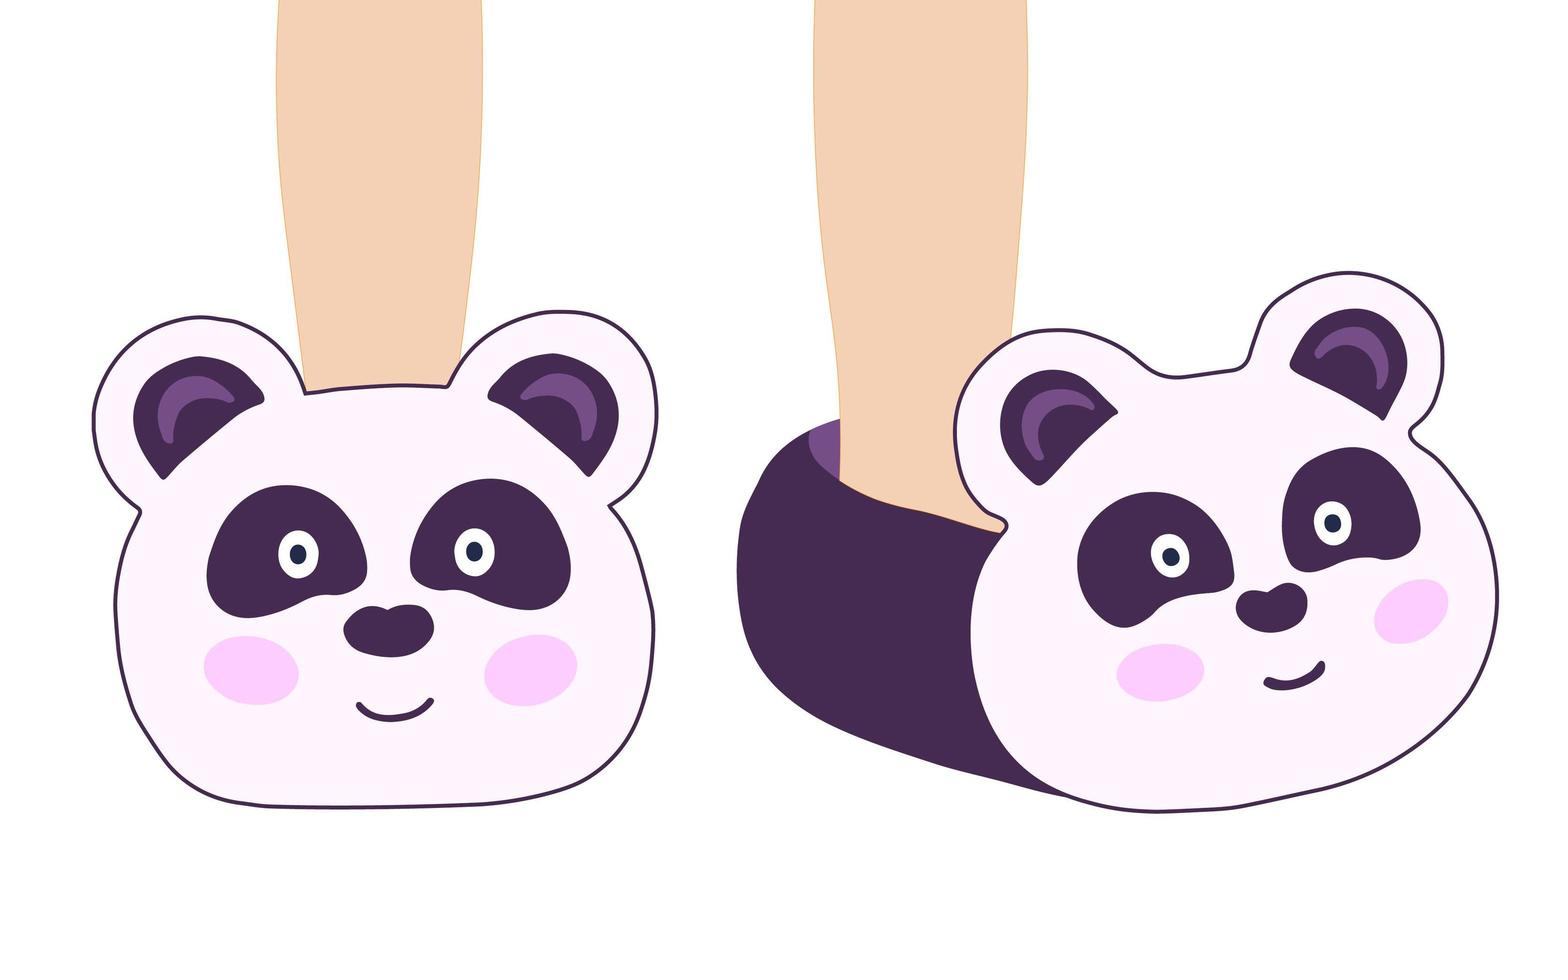 Slippers with pandas. Illustration for printing, backgrounds, wallpapers, covers, packaging, greeting cards, posters, stickers, textile and seasonal design. Isolated on white background. vector